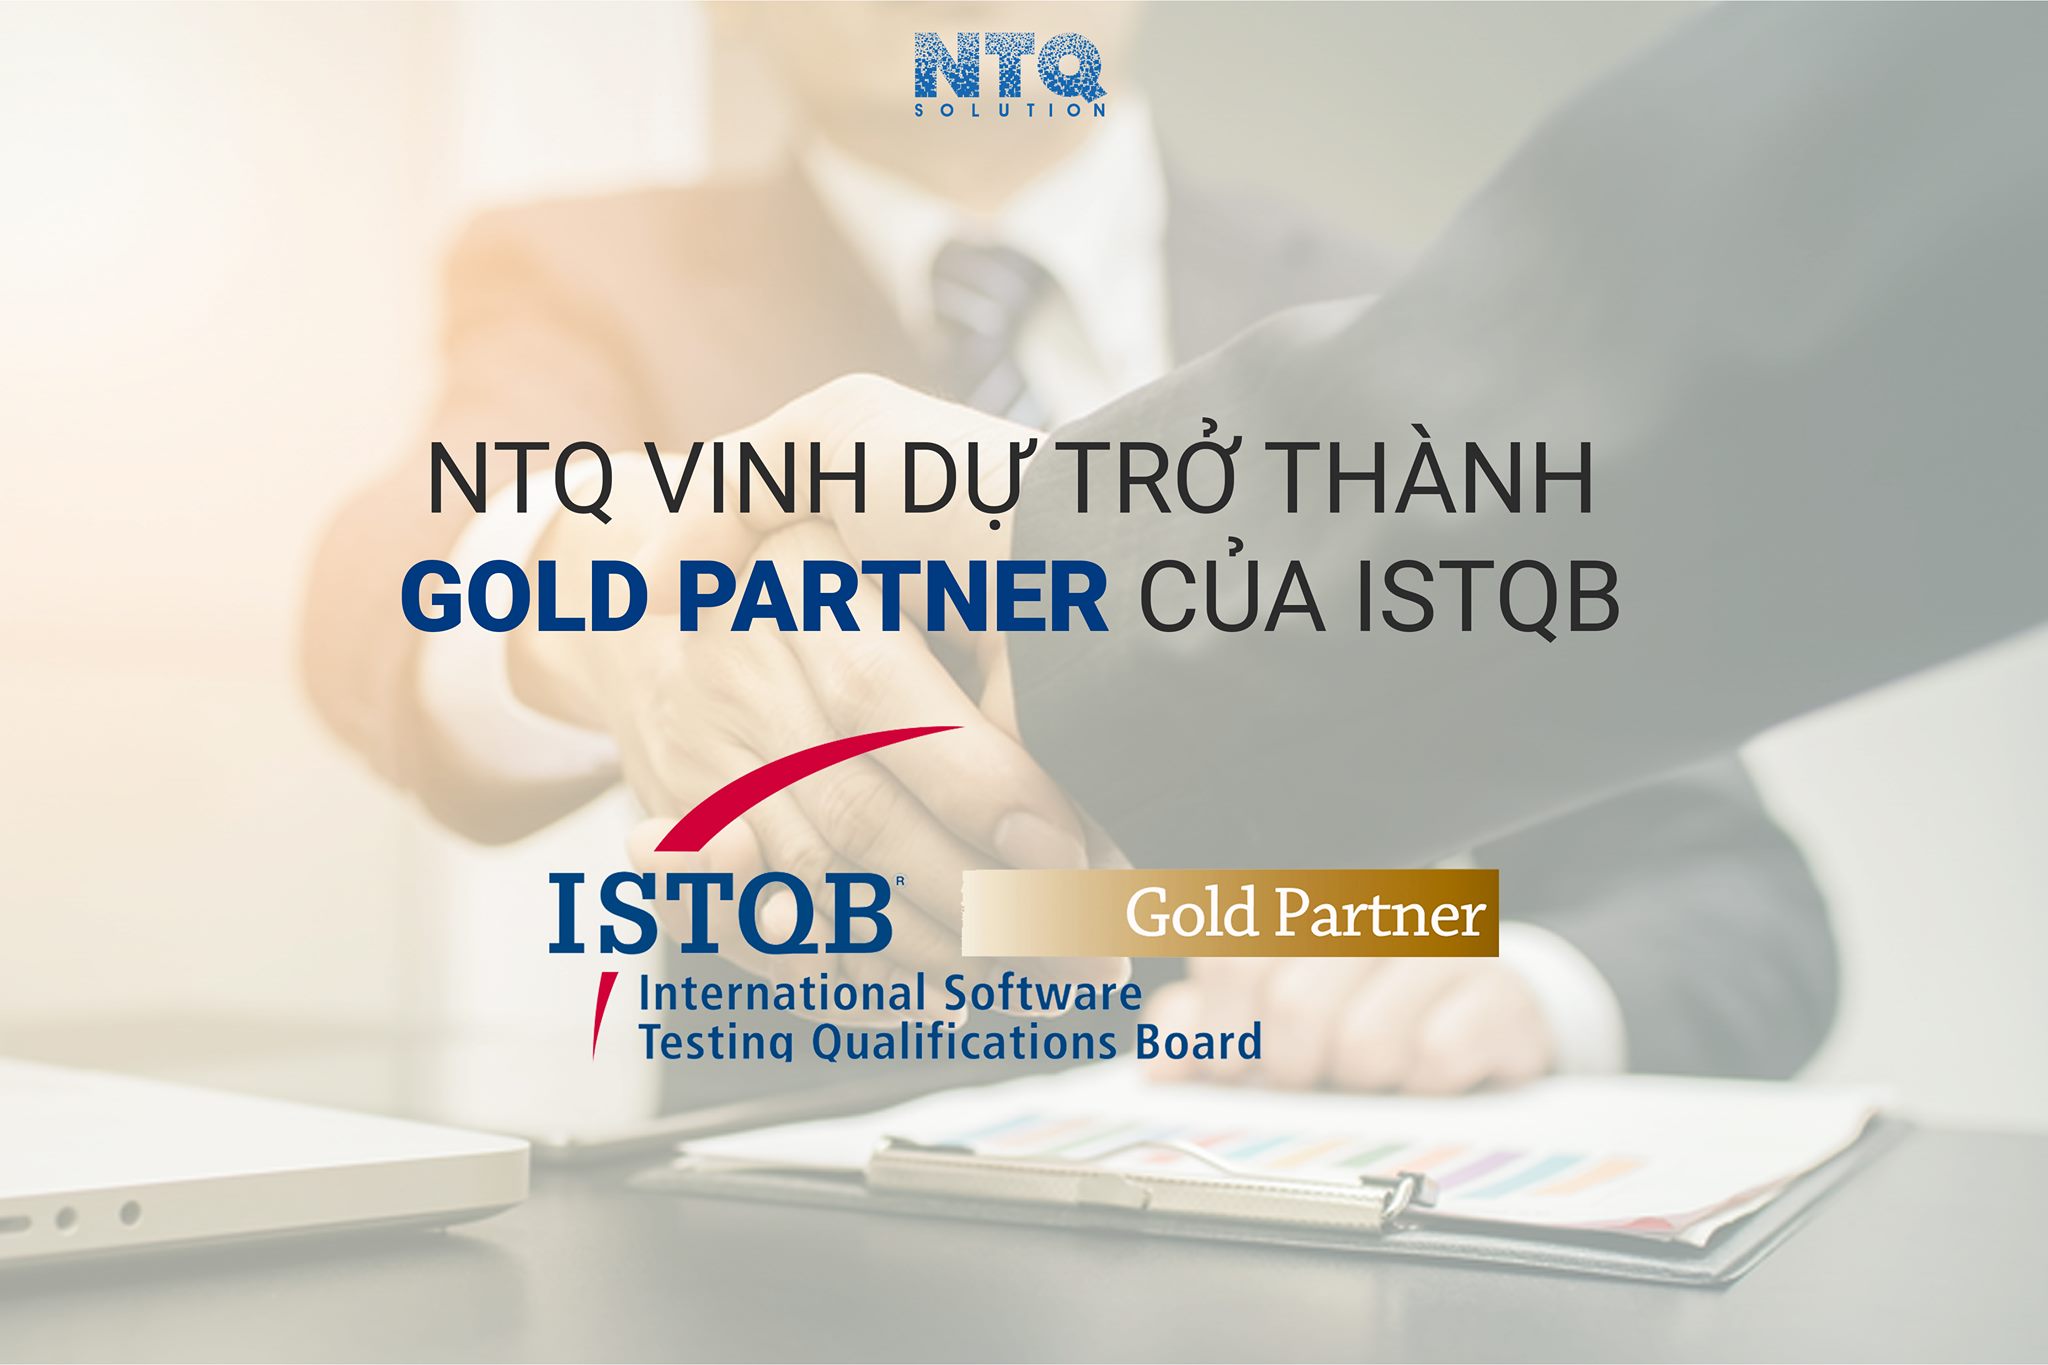 NTQ Solution Is Honored To Be ISTQB’s Gold Partner